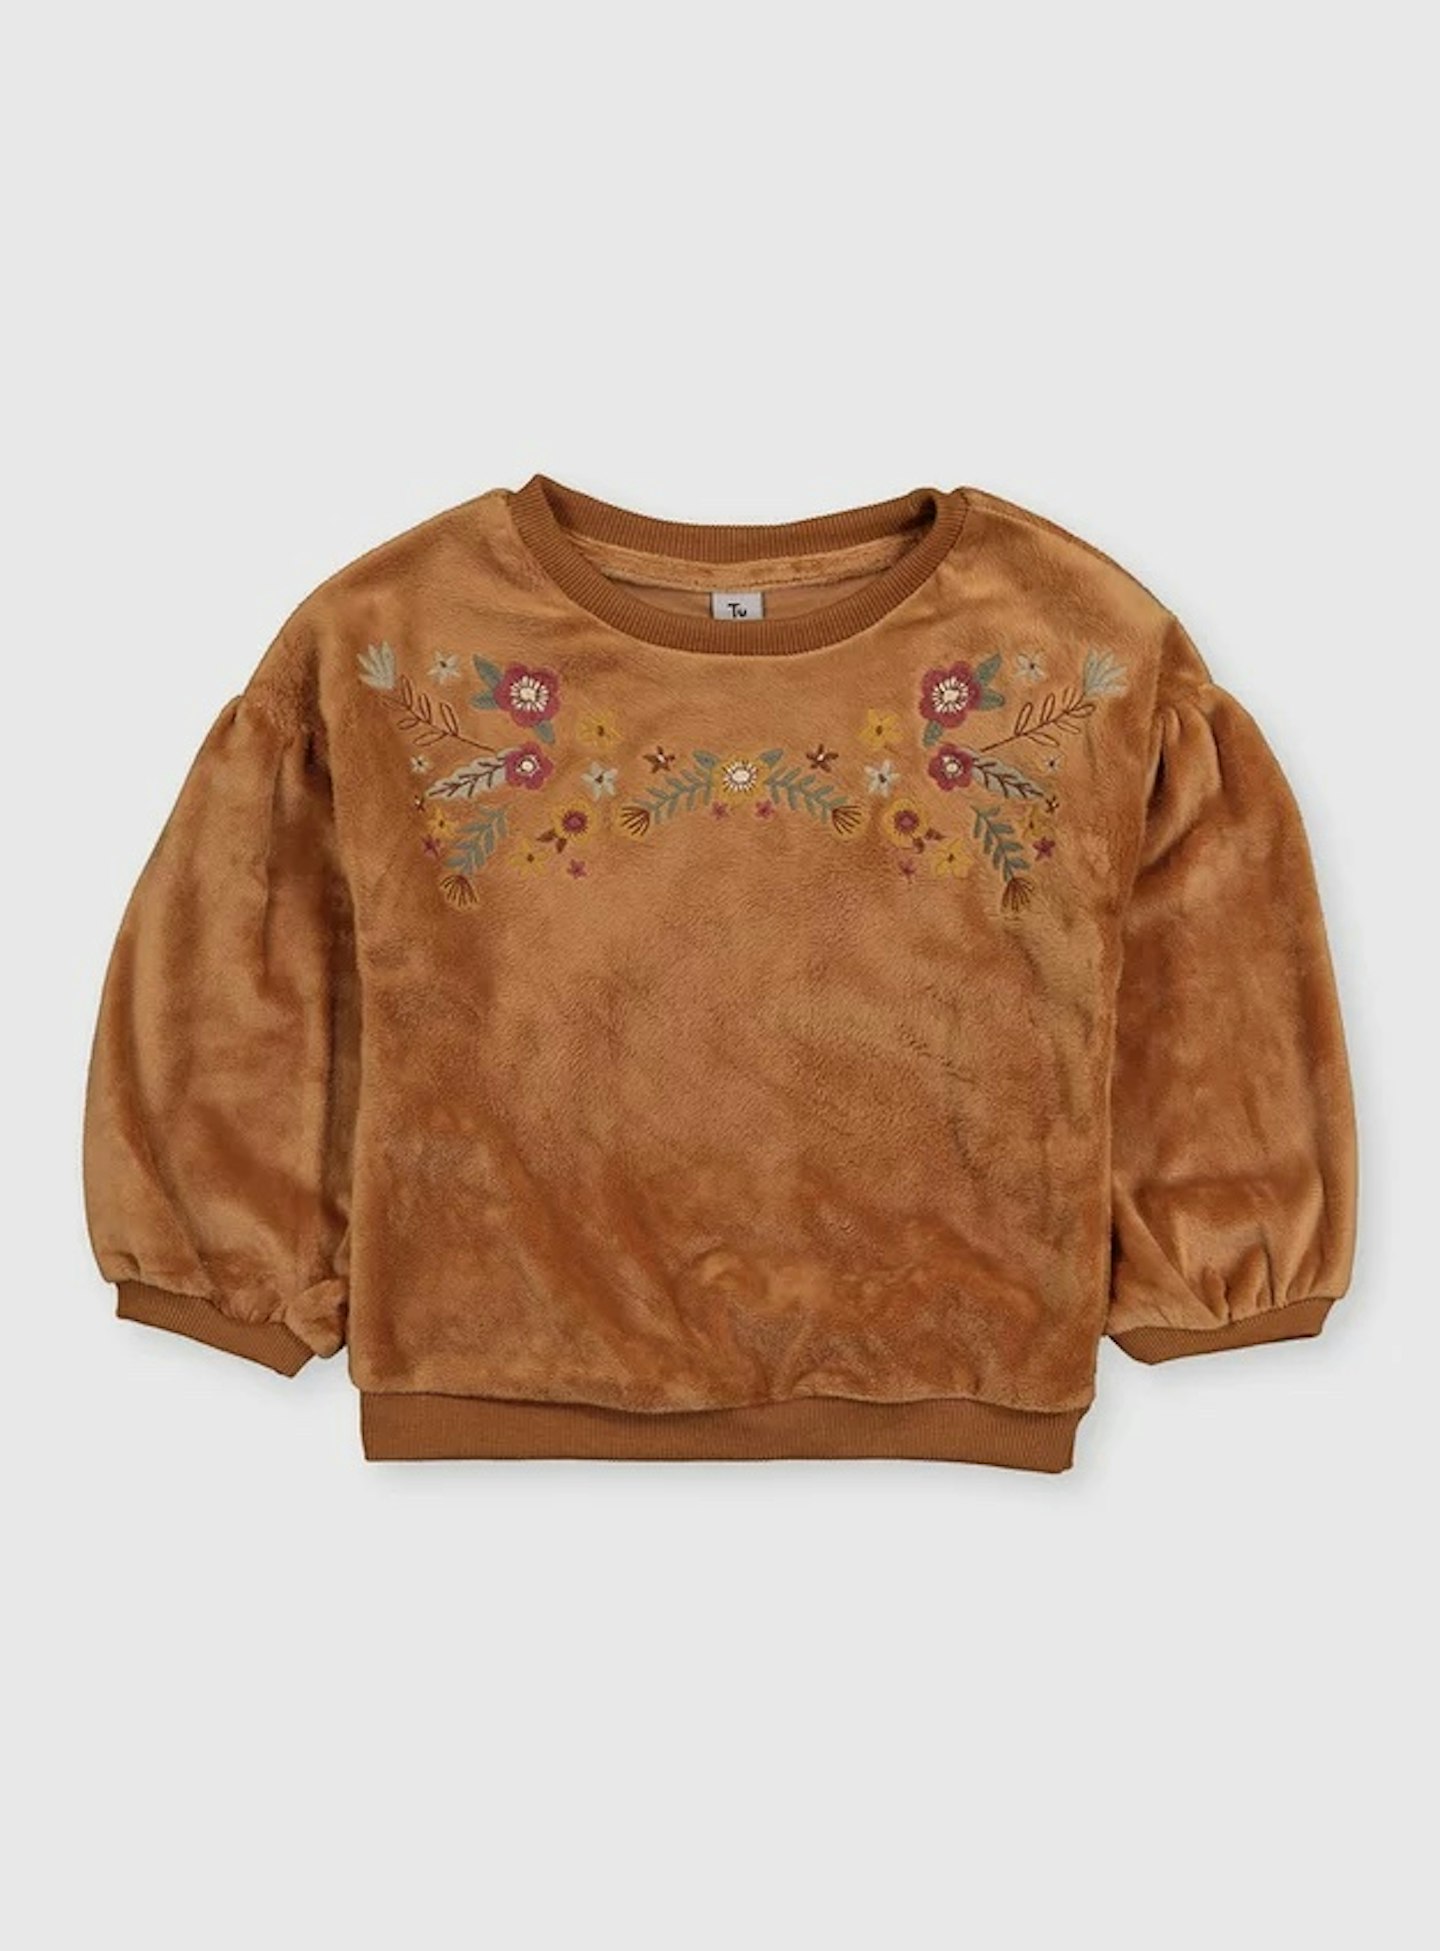 Brown Velour Floral Embroidered Sweatshirt (1-7 Years), From £8.00